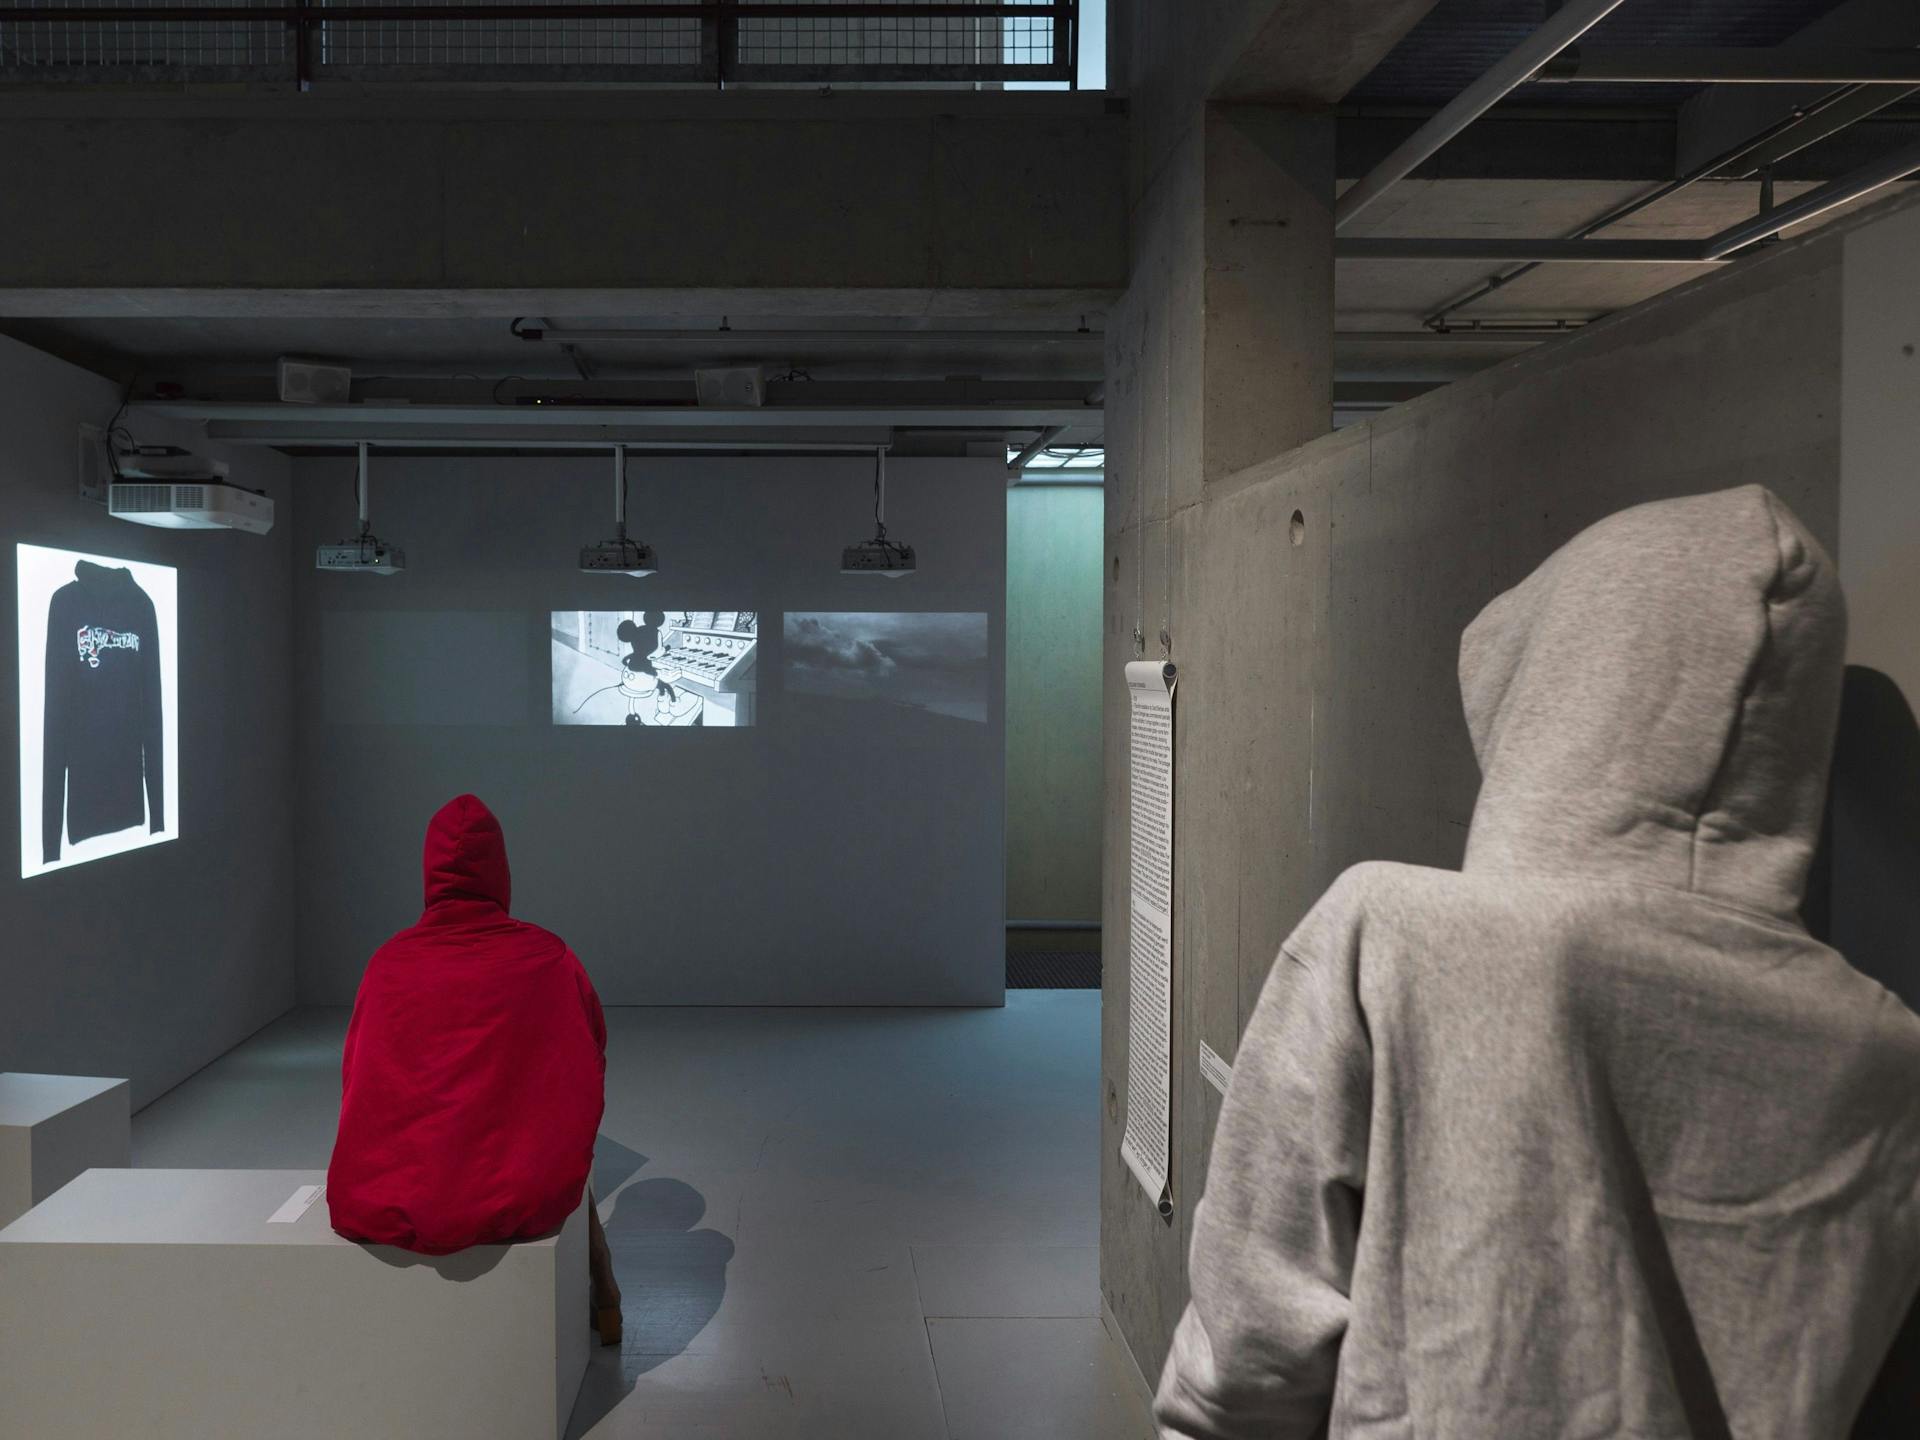 Bogomir Doringer, The Hoodie, 2019. Editing Rafael Kozdron. Sound design Michael Bucuzzo. AI GAN by Selam-X. Research in collaboration with Lou Stoppard. Commissioned by Het Nieuwe Instituut. Funded by Mondriaan Fonds. Foto Johannes Schwartz.  